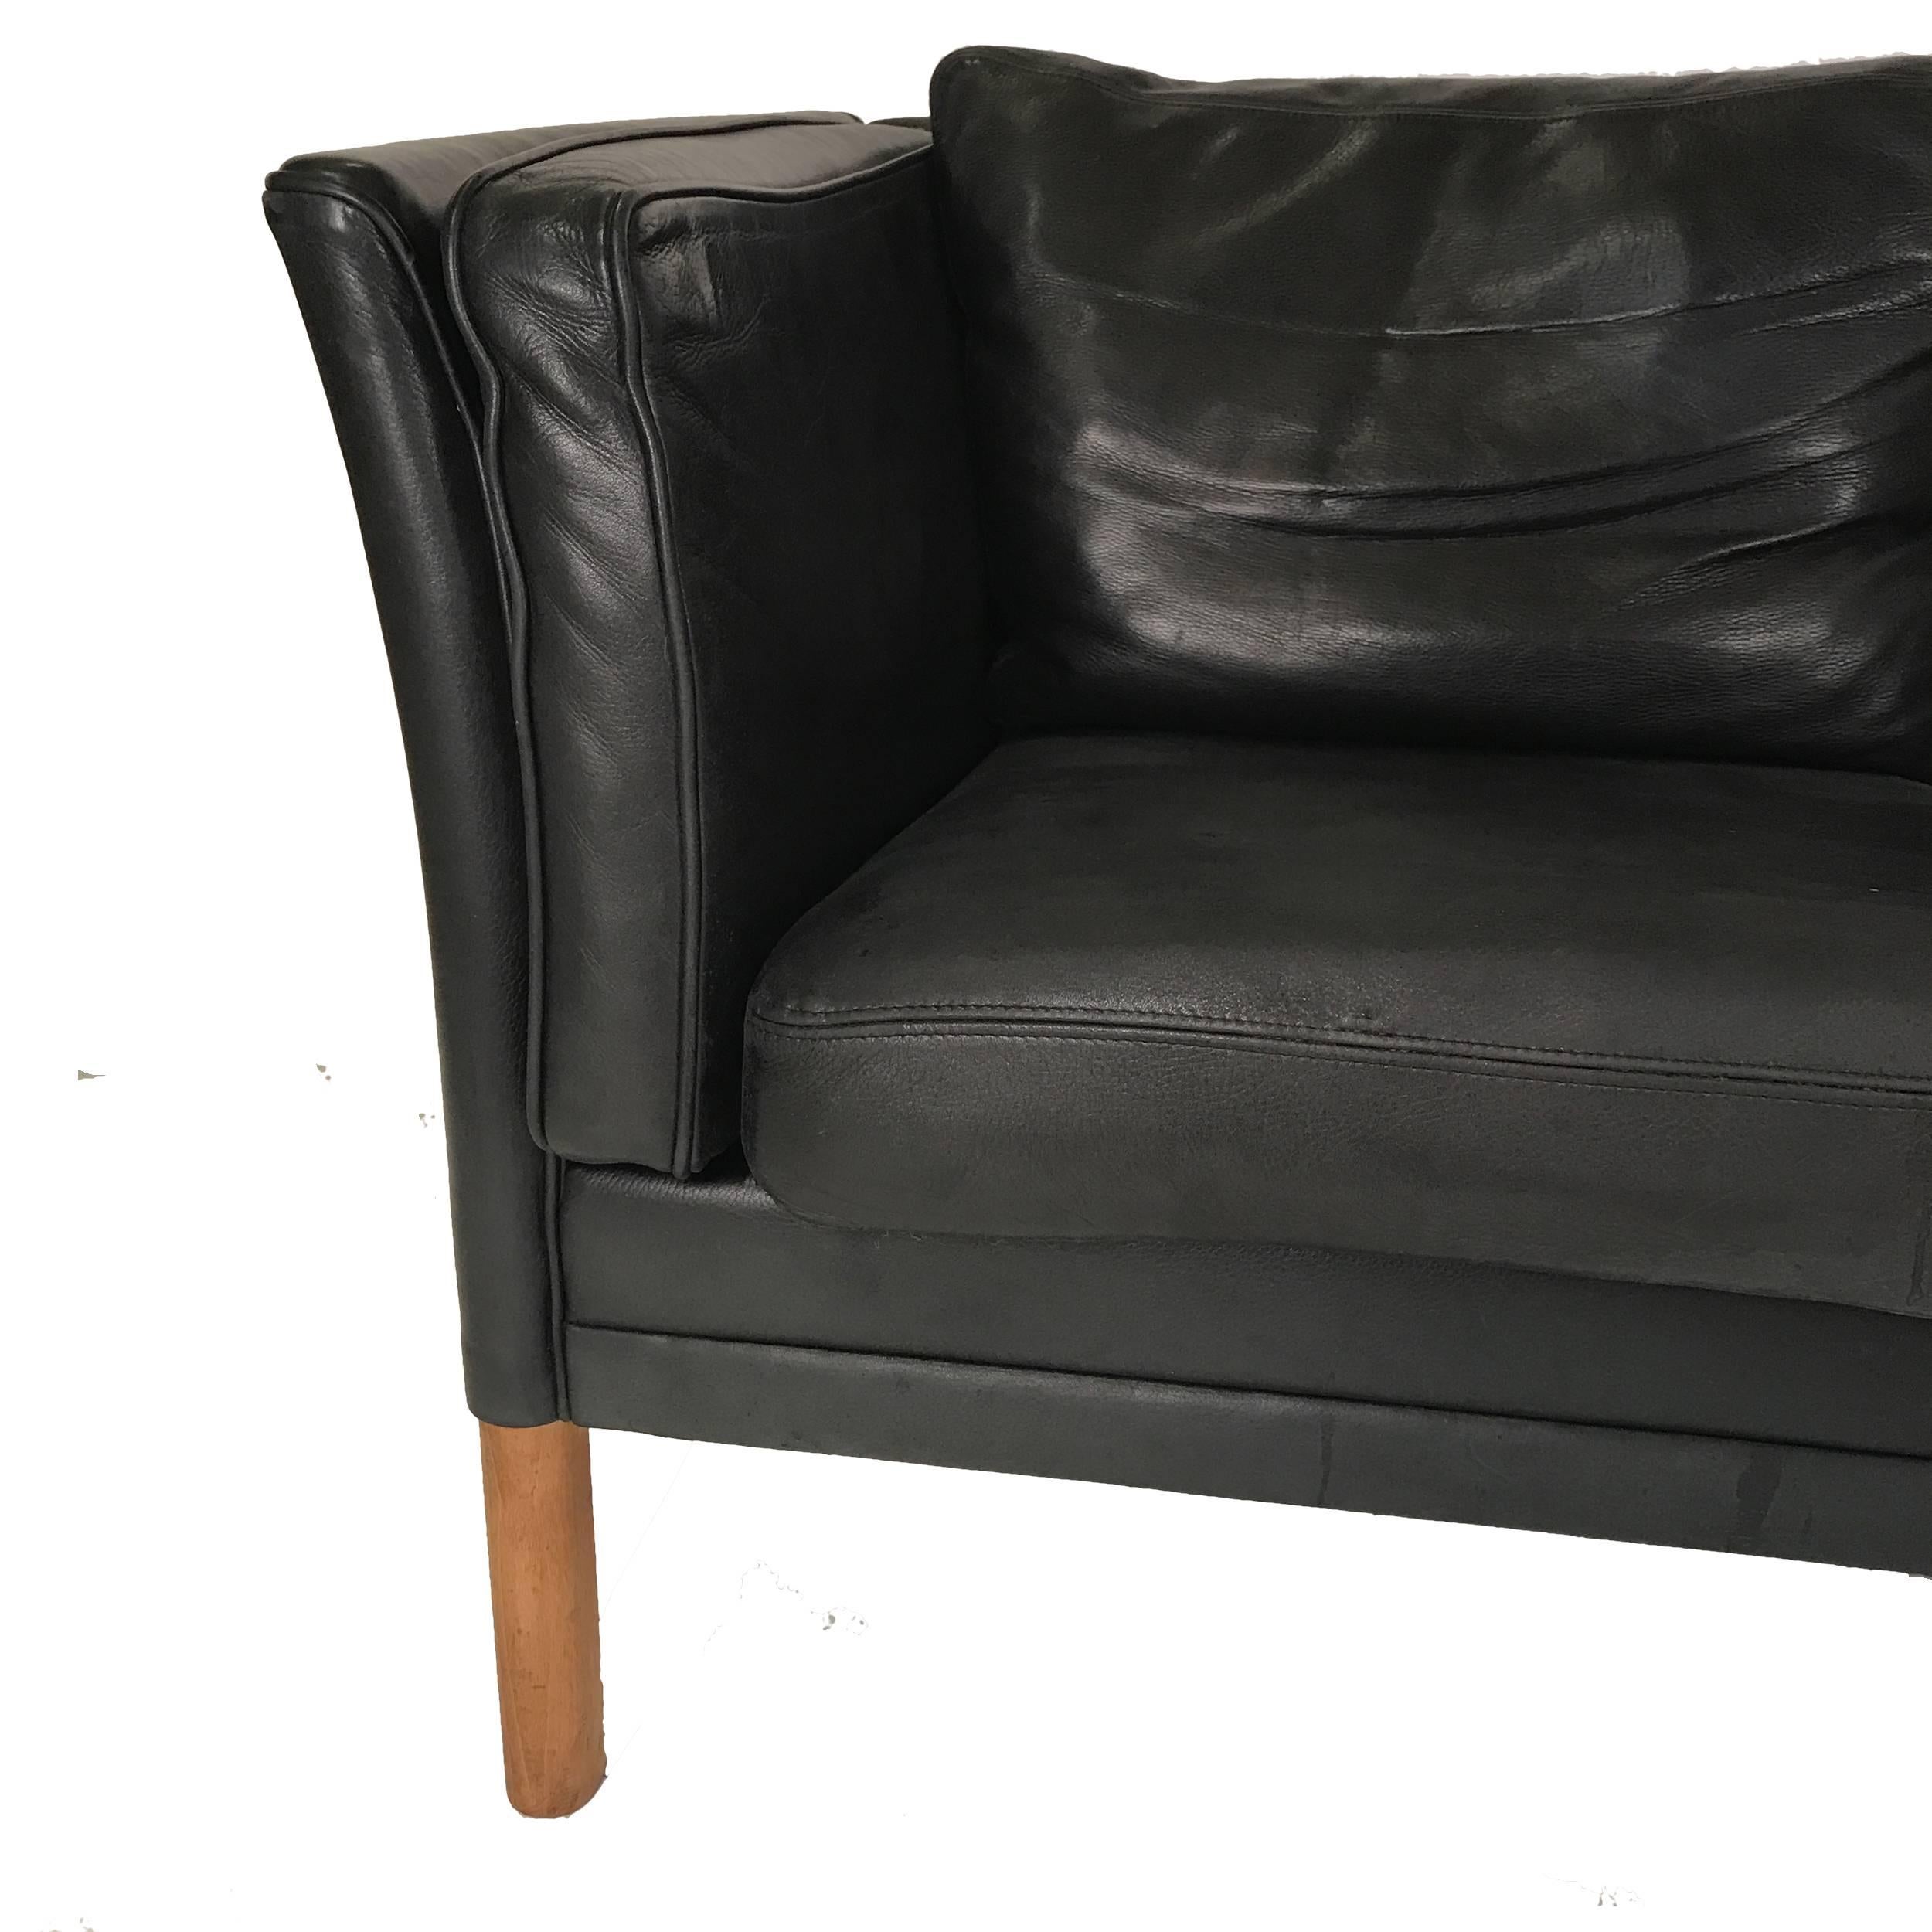 High quality black leather sofa in the manner of the Classic Børge Mogensen sofa. Beautiful patina of high quality leather.